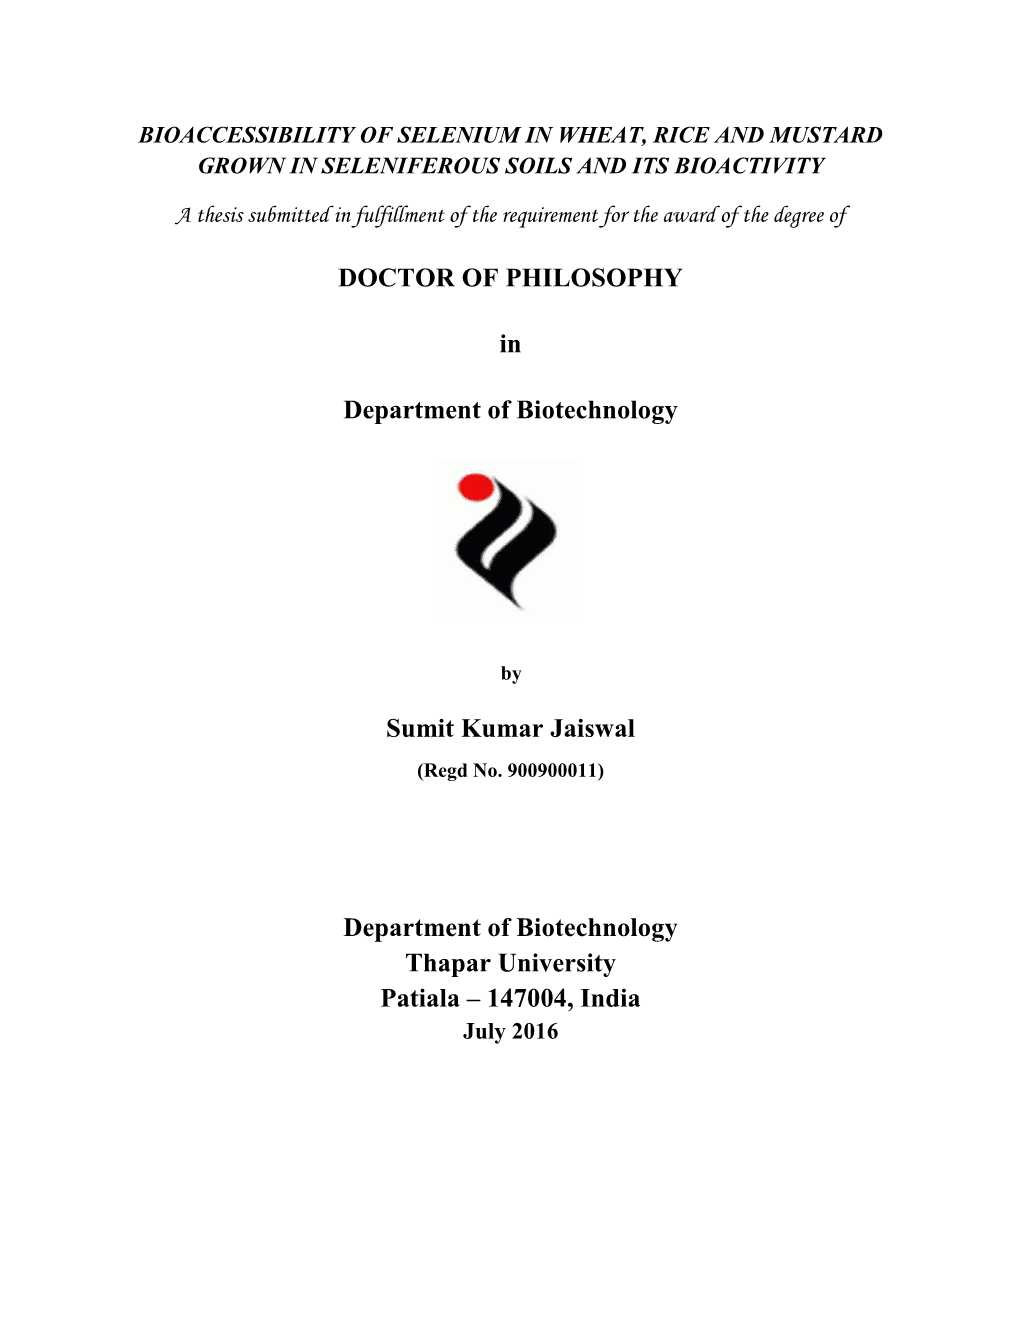 DOCTOR of PHILOSOPHY in Department of Biotechnology Sumit